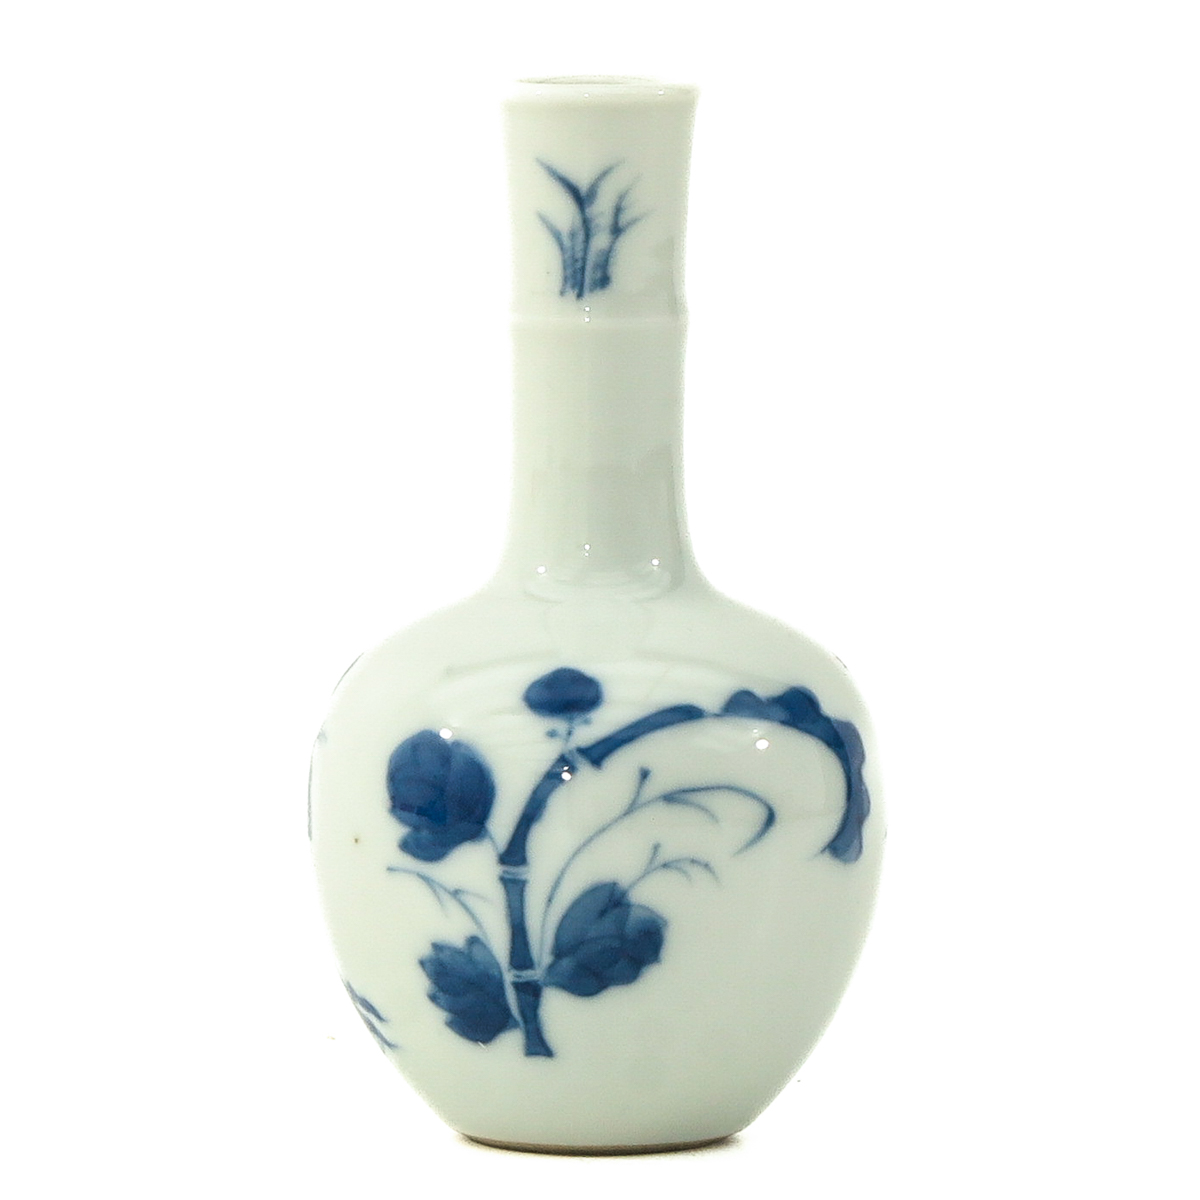 A Miniature Blue and White Vase